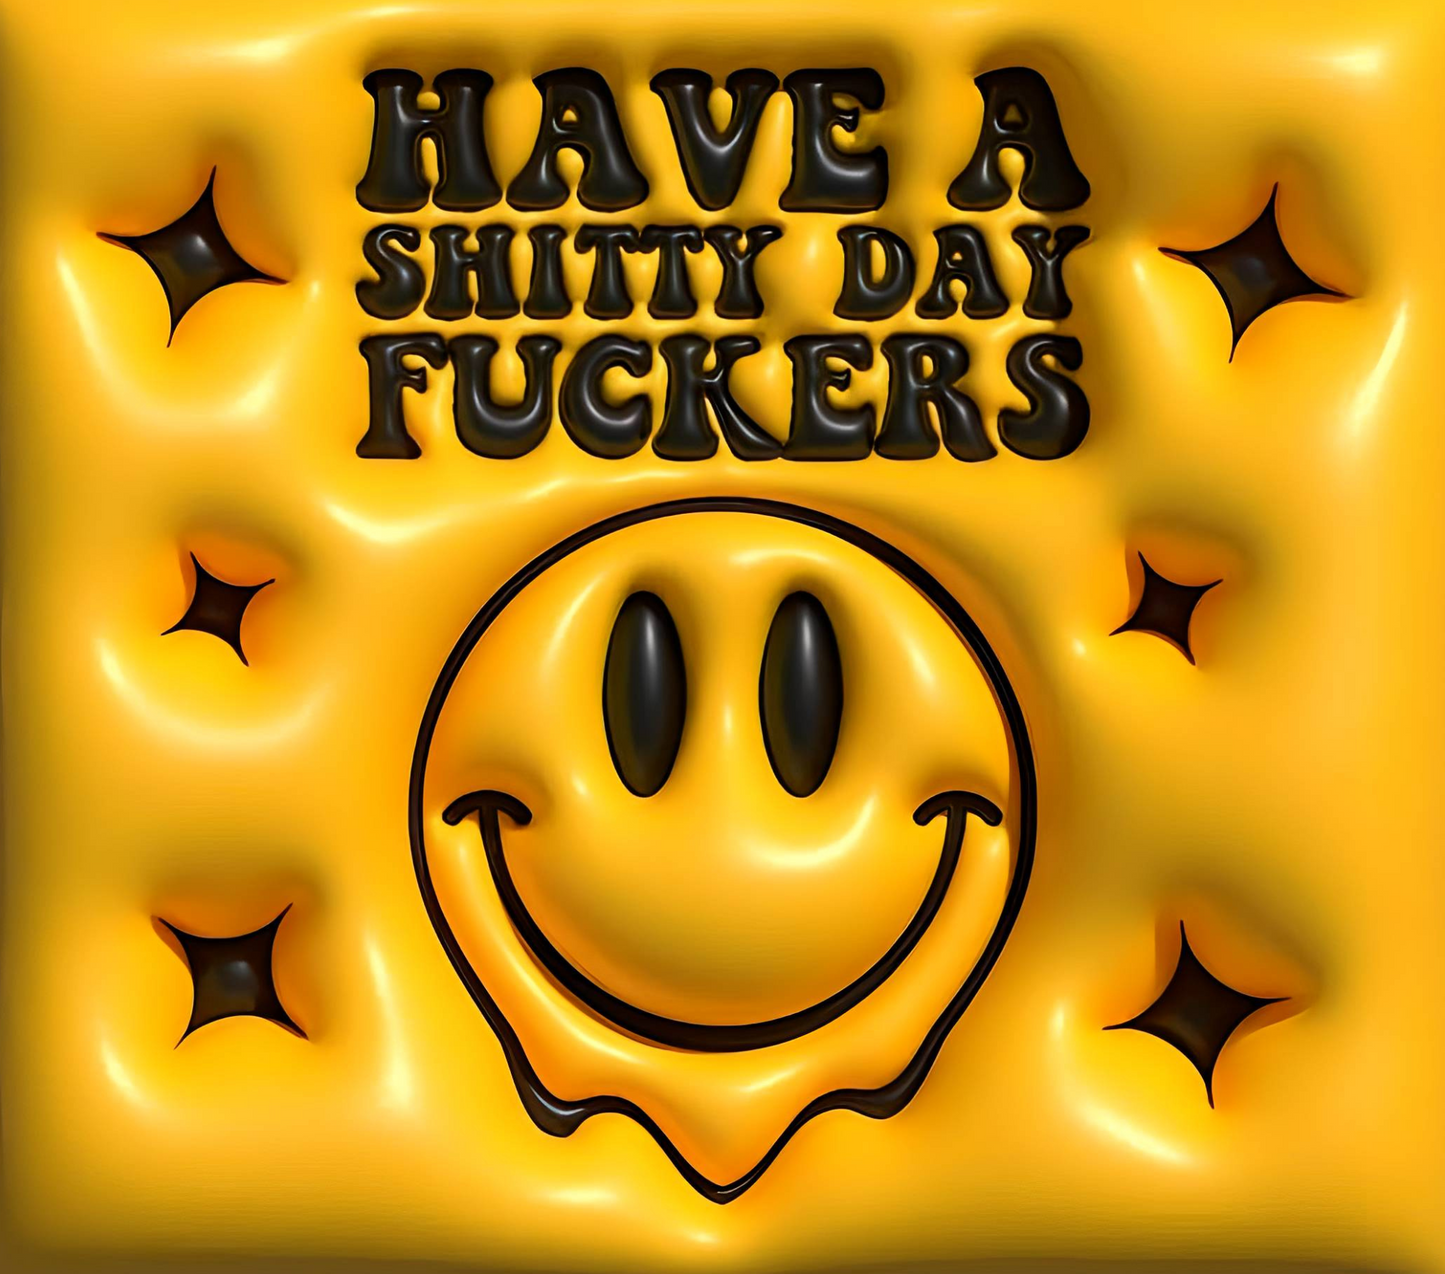 HAVE A SHITTY DAY.....